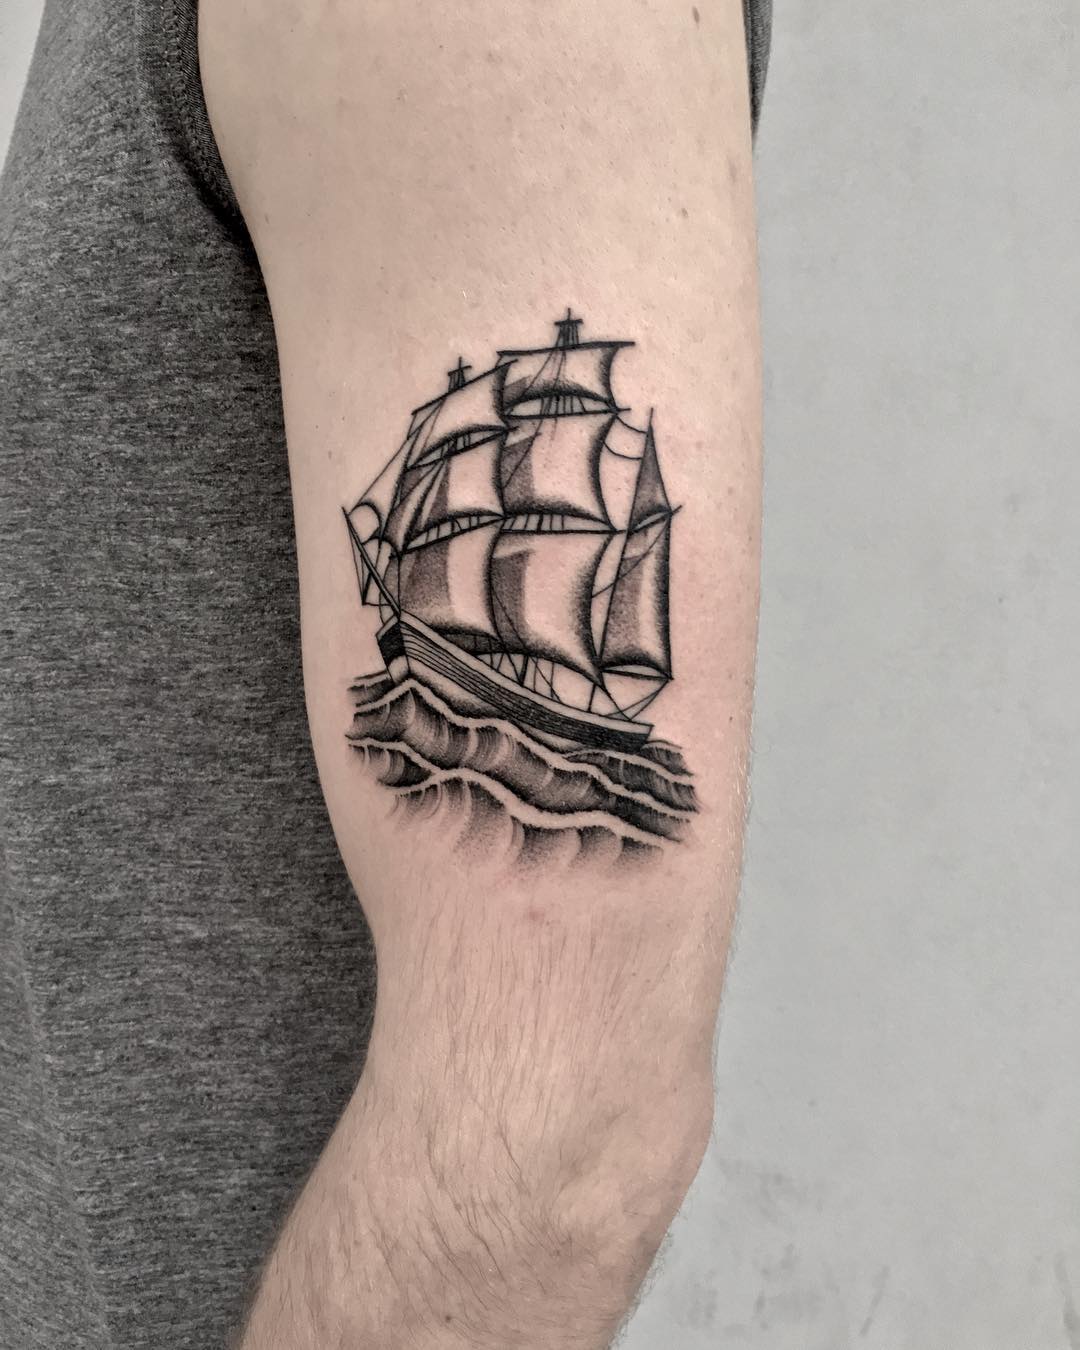 Cool ship by @justinoliviertattoo